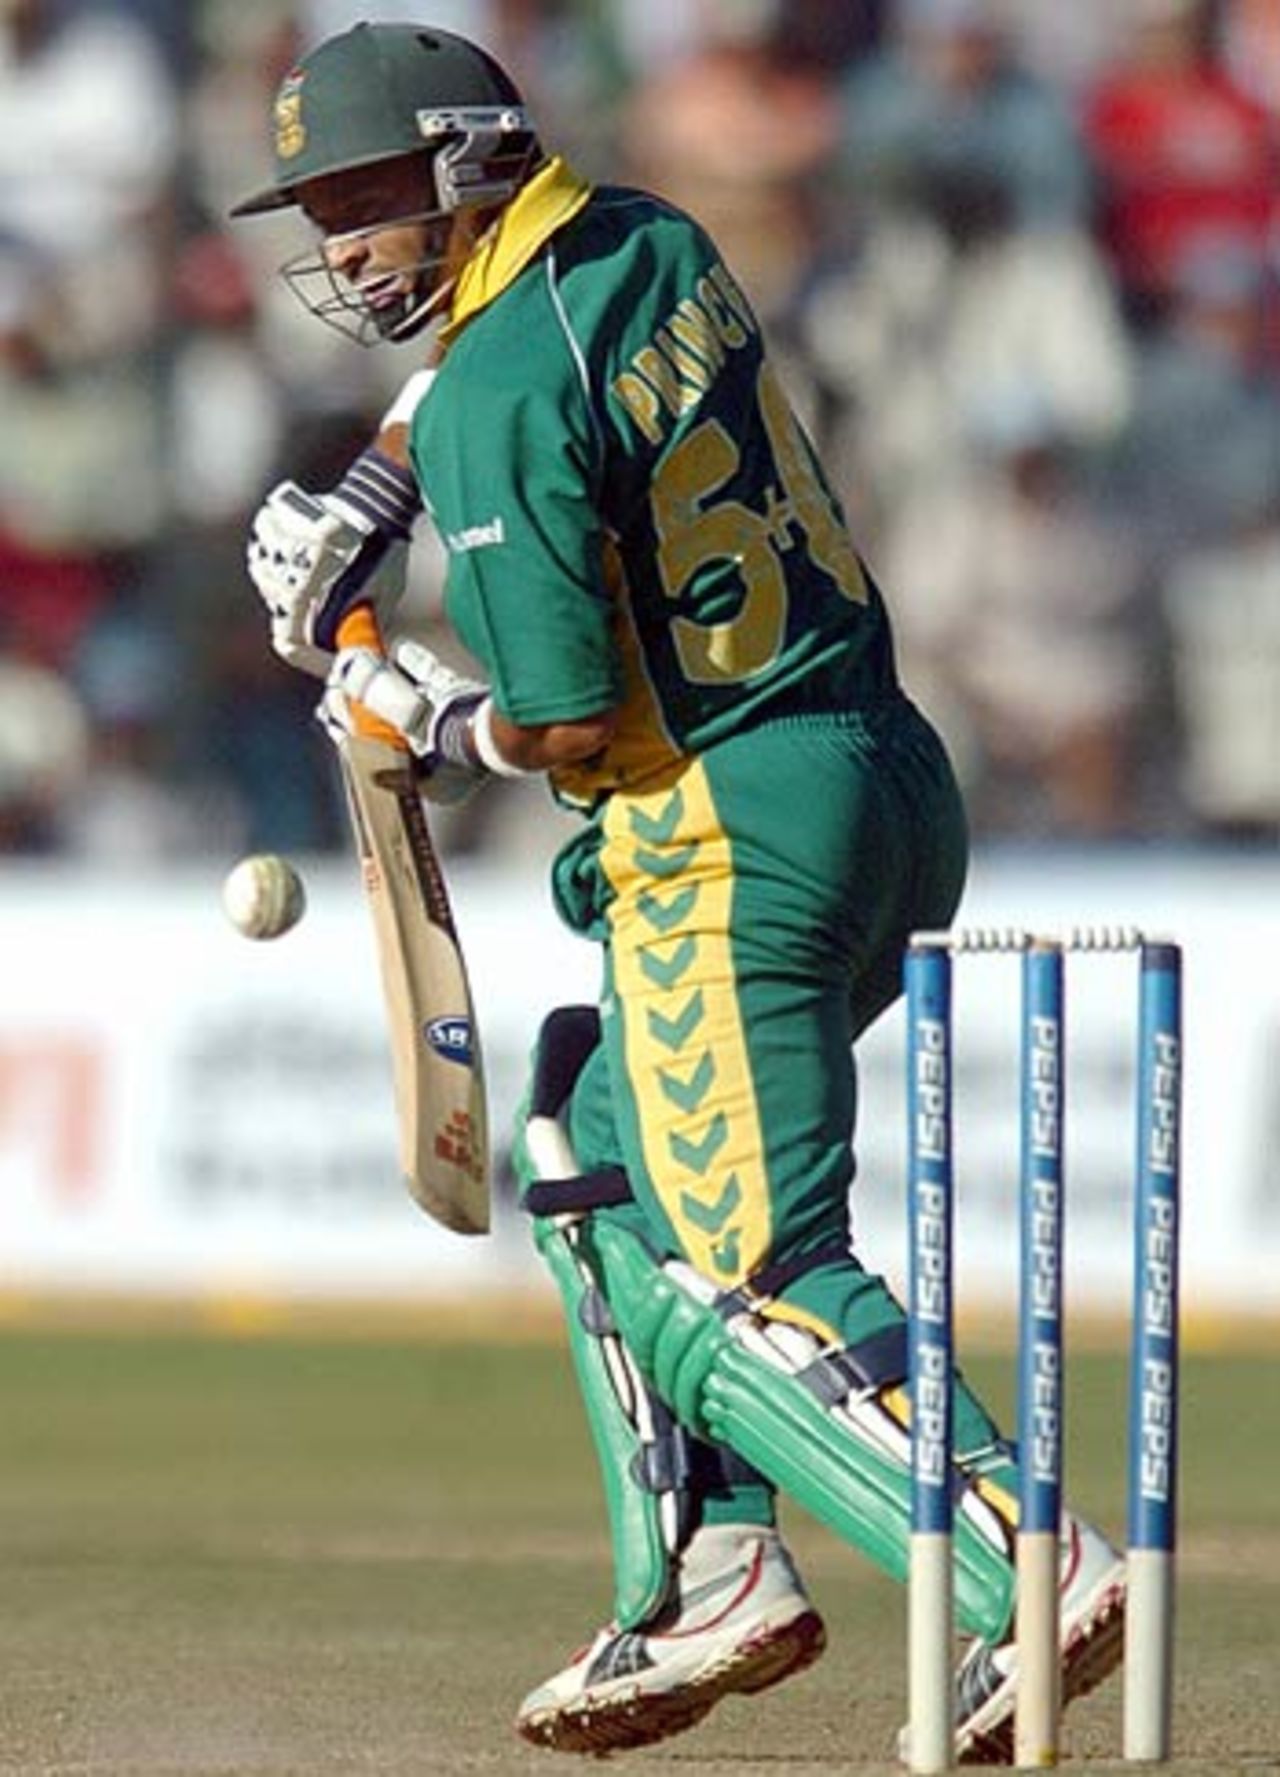 Ashwell Prince got to 30 before falling to Virender Sehwag, India v South Africa, 2nd ODI, Bangalore, November 19, 2005